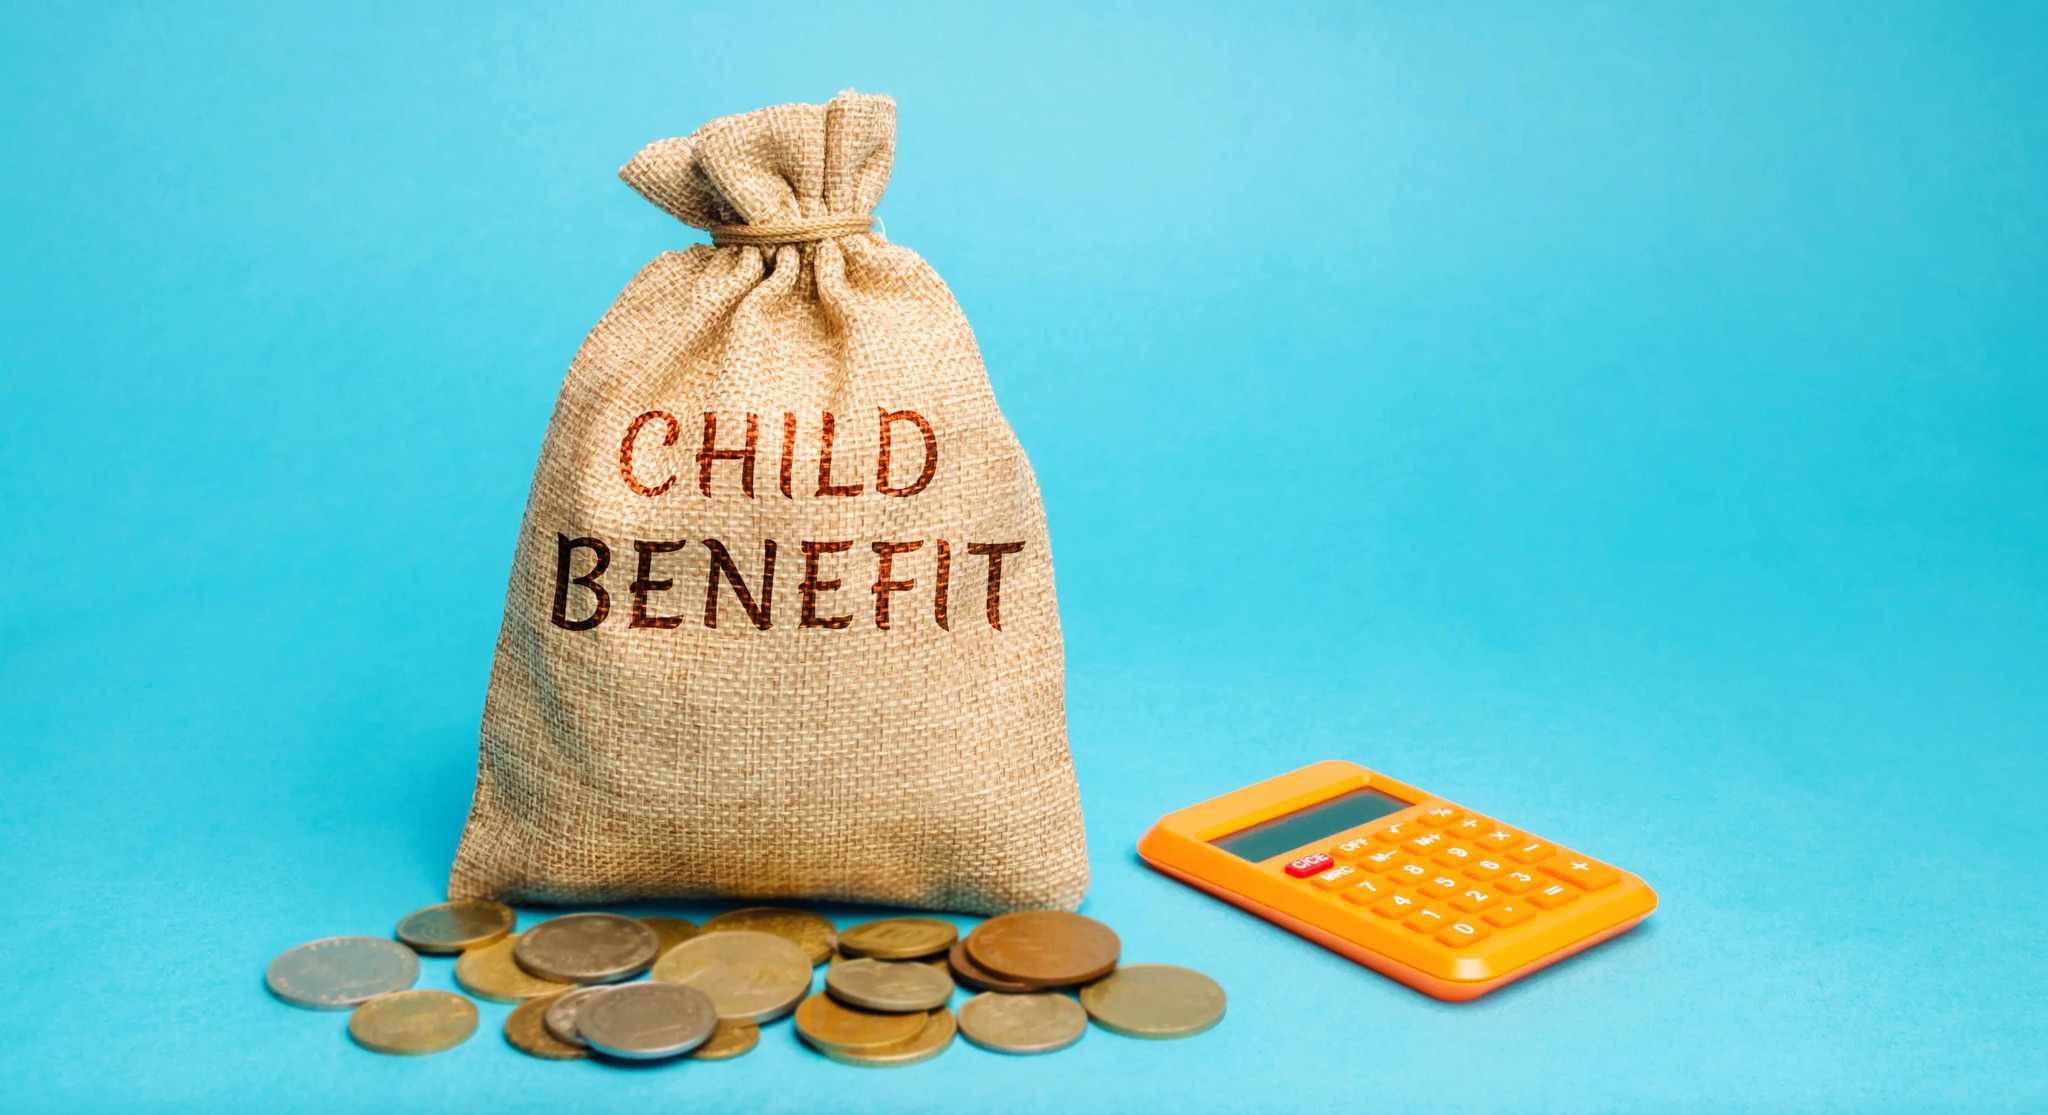 Universal Credit Live News: The latest on Child Benefits, UC Payments, Housing Benefit...